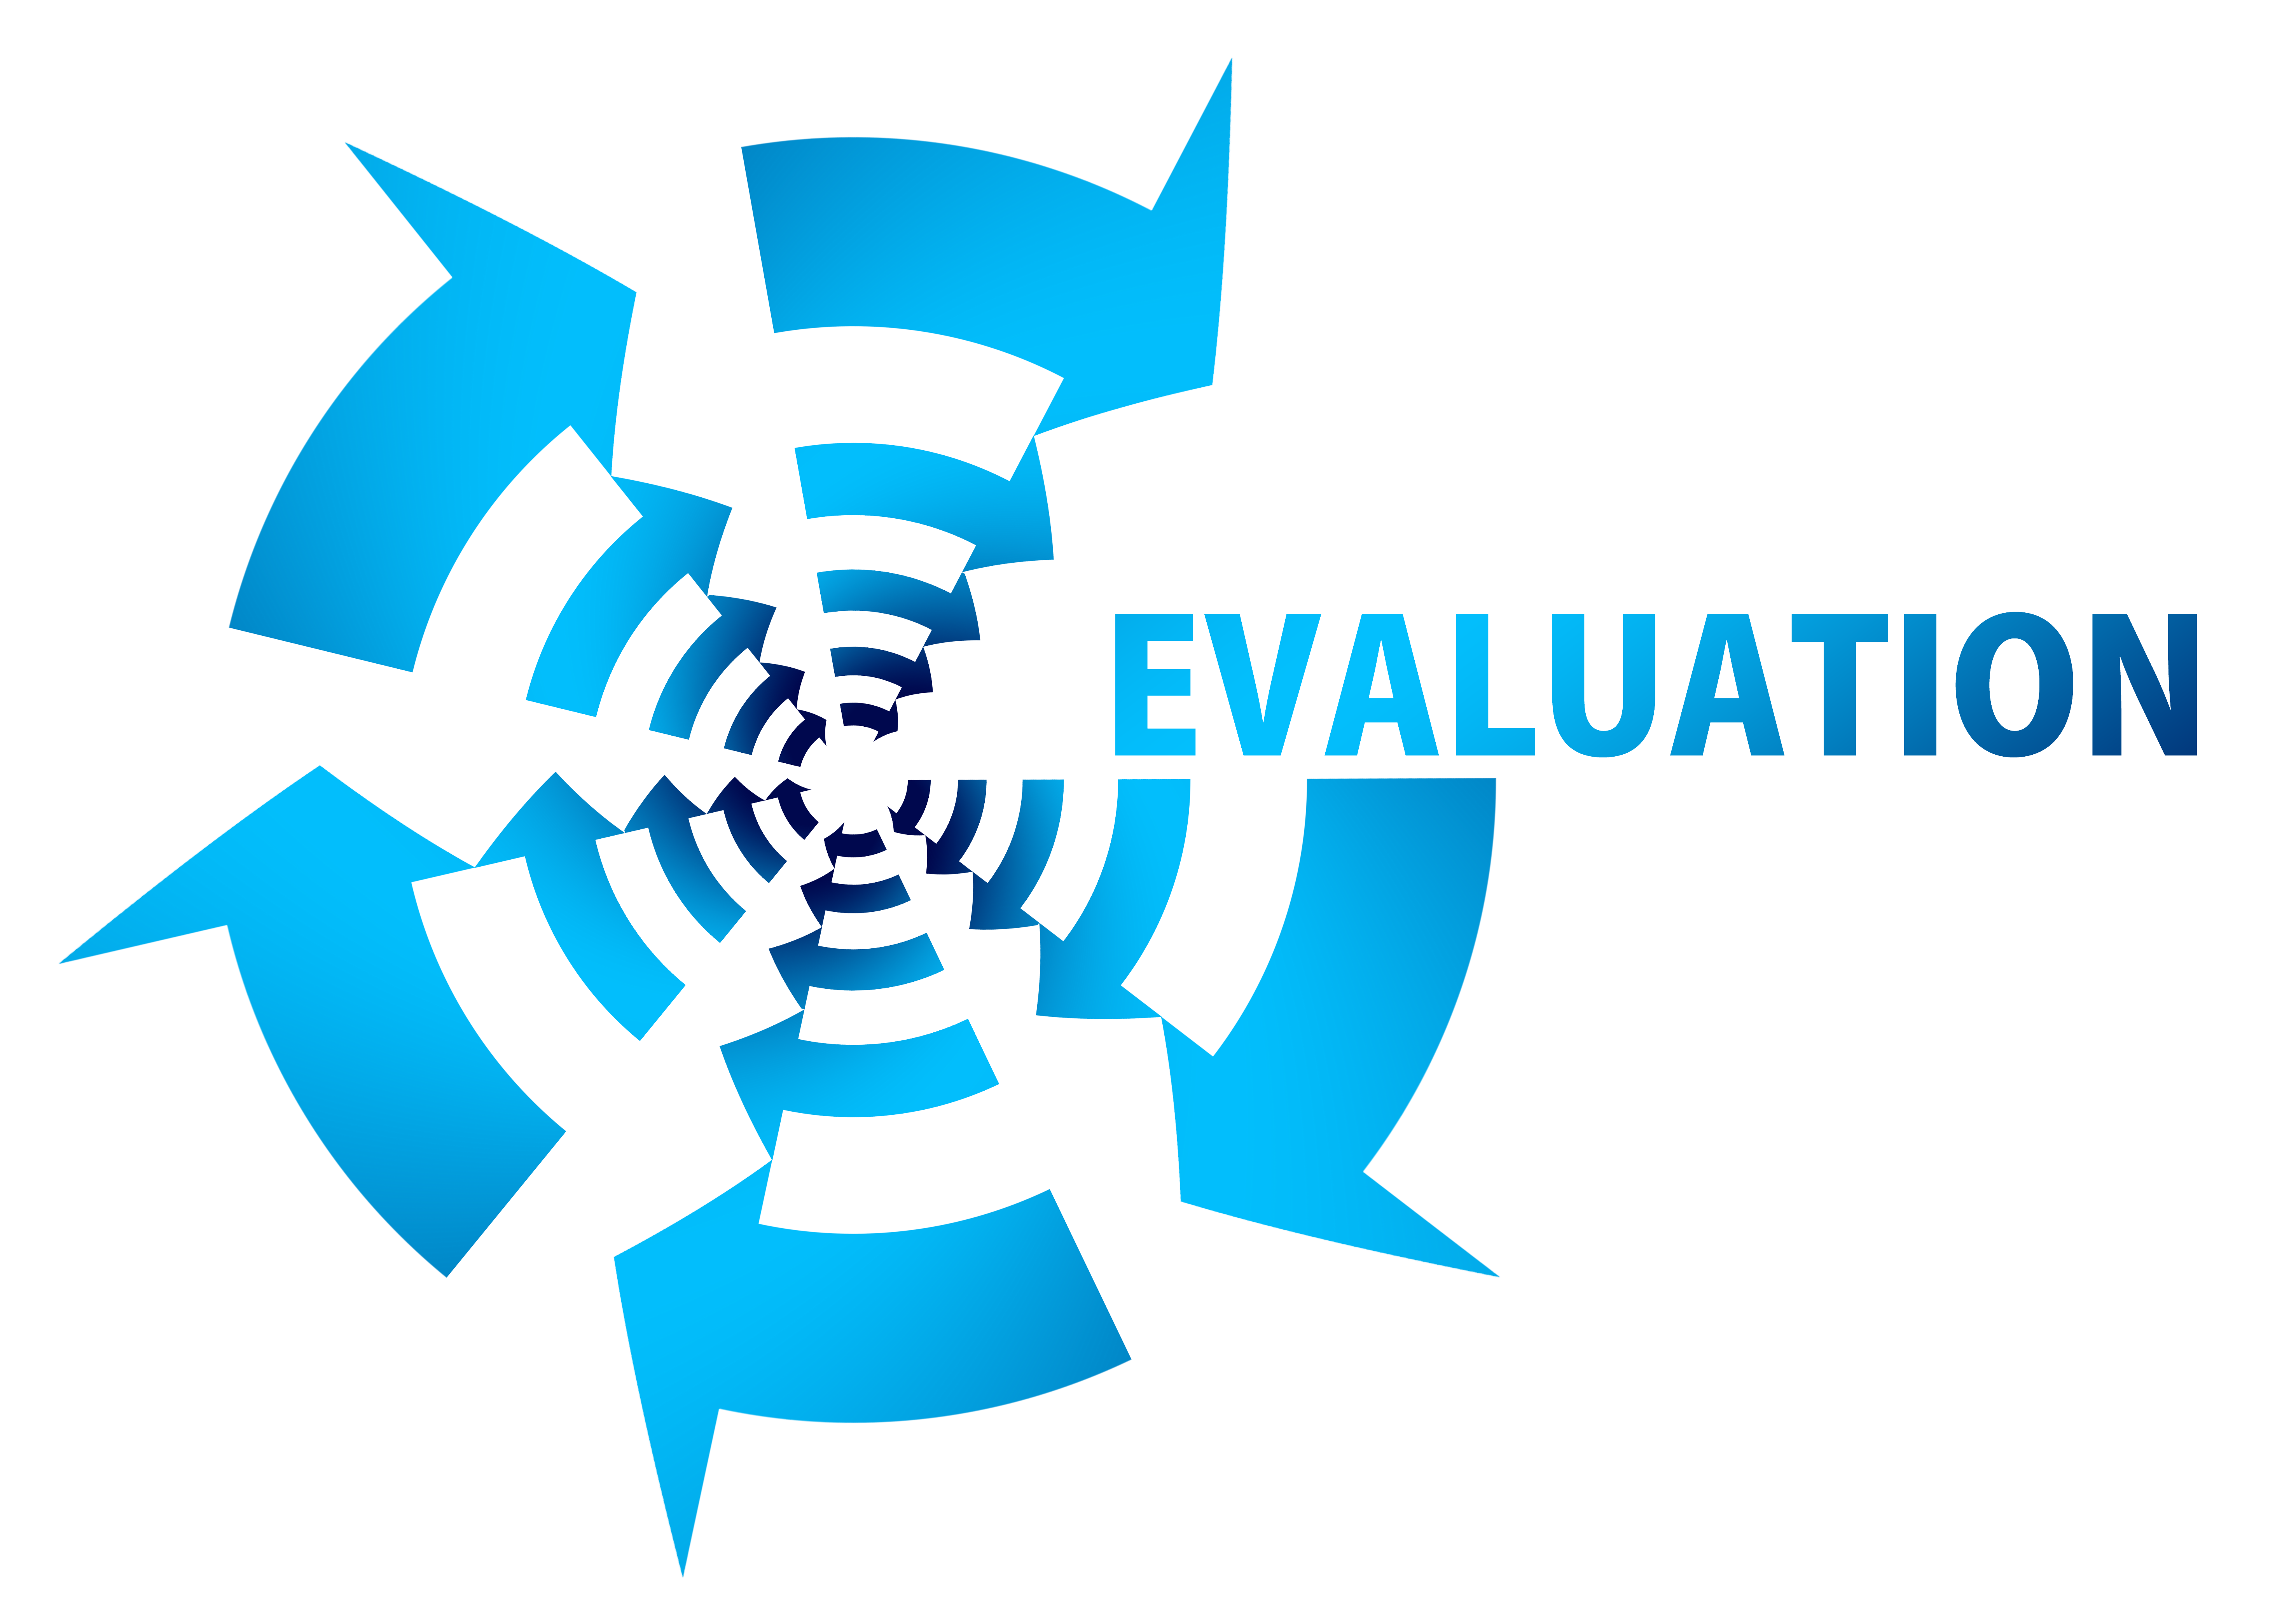 Series of blue arrows spiraling in a clockwise direction that symbolize the word, "evaluation."